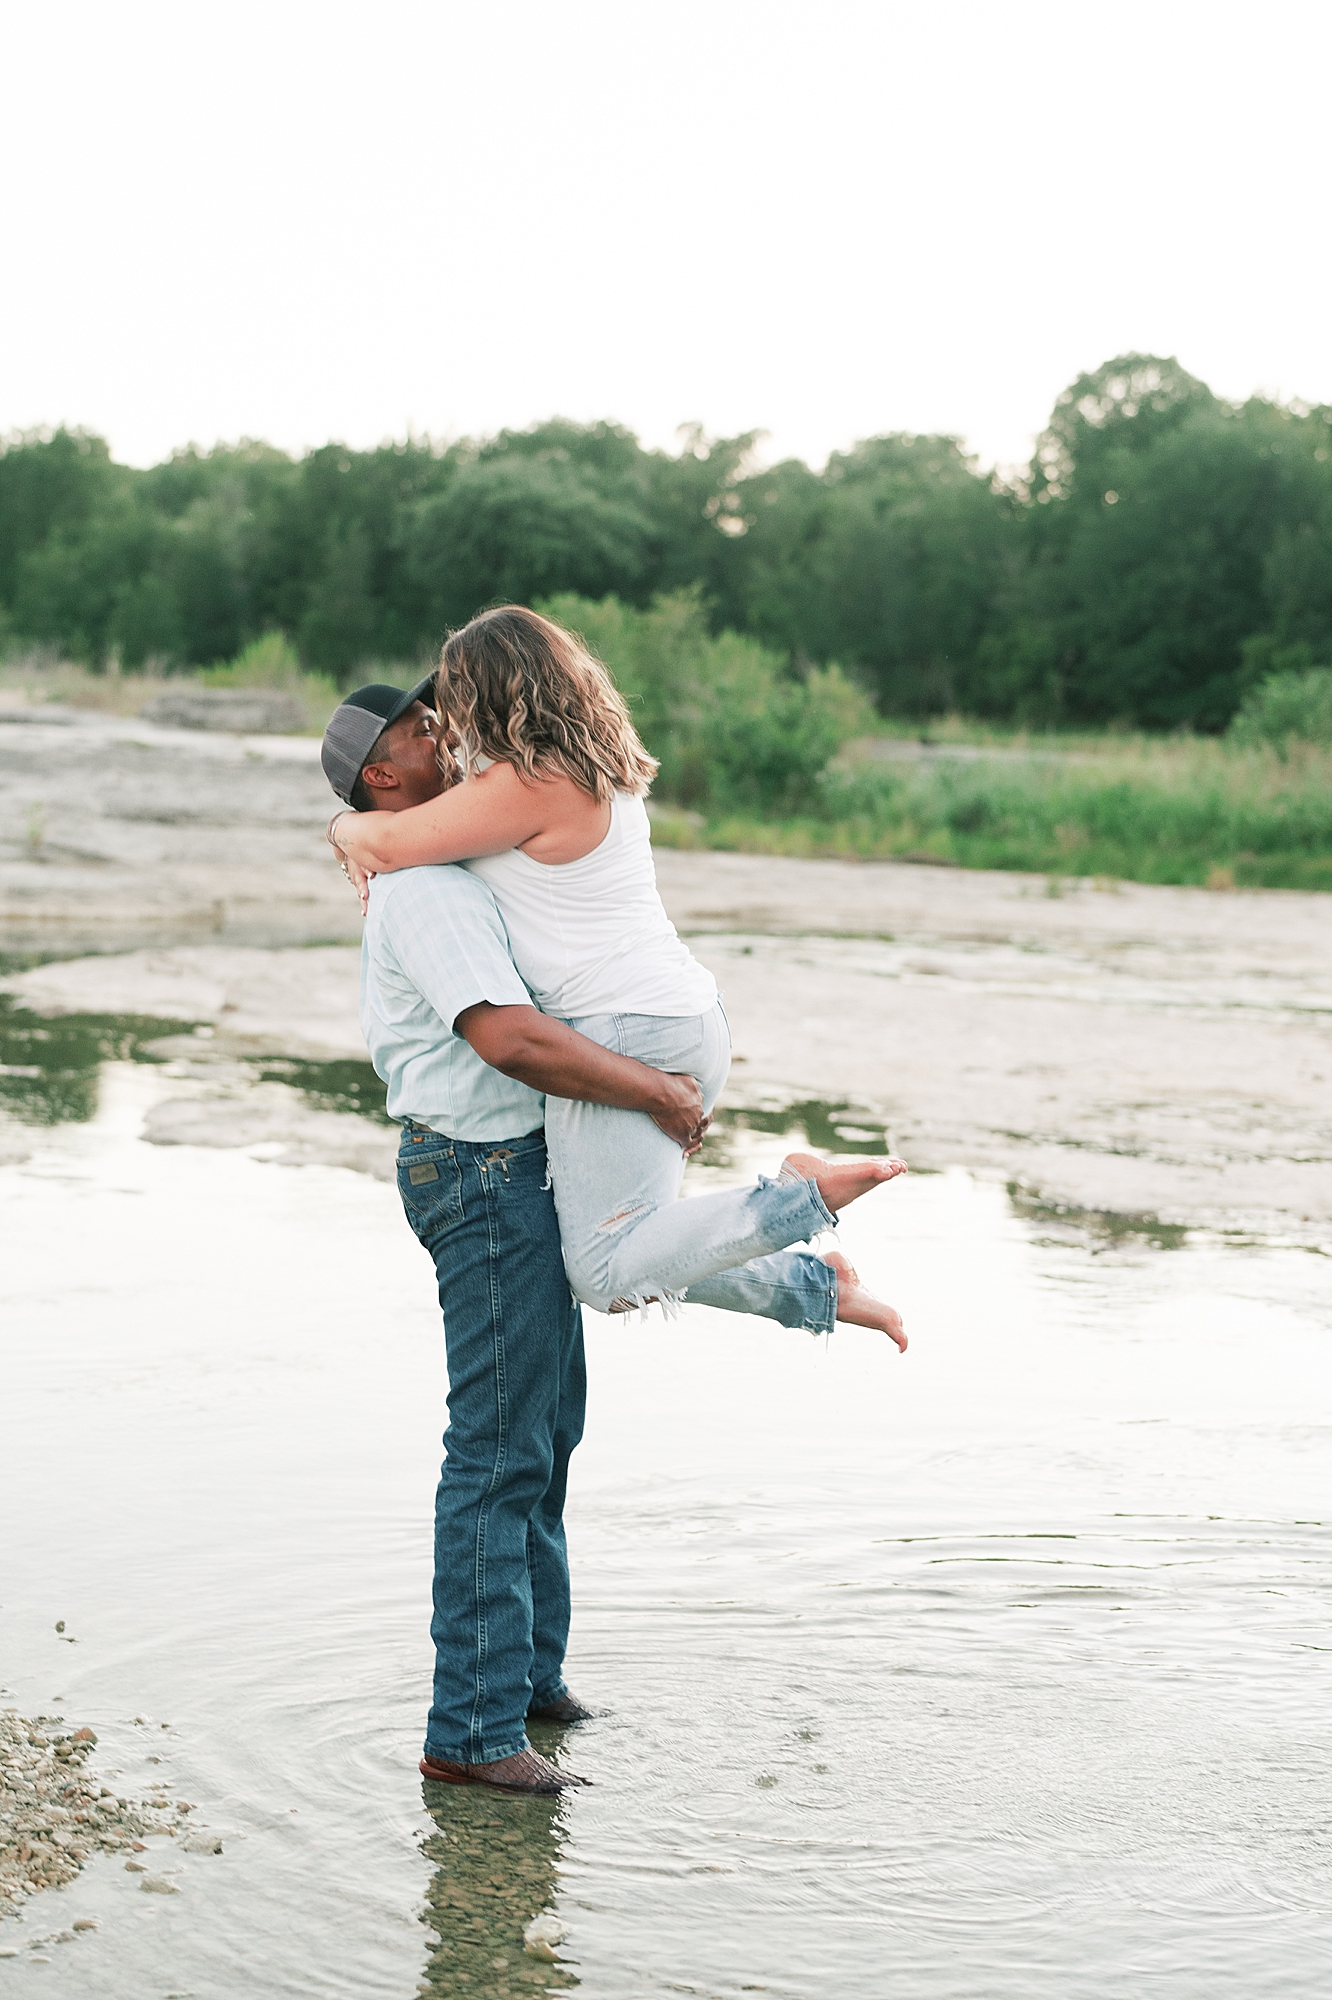 This beautiful bride to be DIY'd her own denim bridal jacket, to go with her flowy pink tulle skirt. This created the perfect outfit for her engagement session at McKinney Falls! Click through to see her outfit inspo and see how adorable she is with her fiance! #engagementsession #atxengagementsession #engagementsessionlocations #engagementsessionoutfit